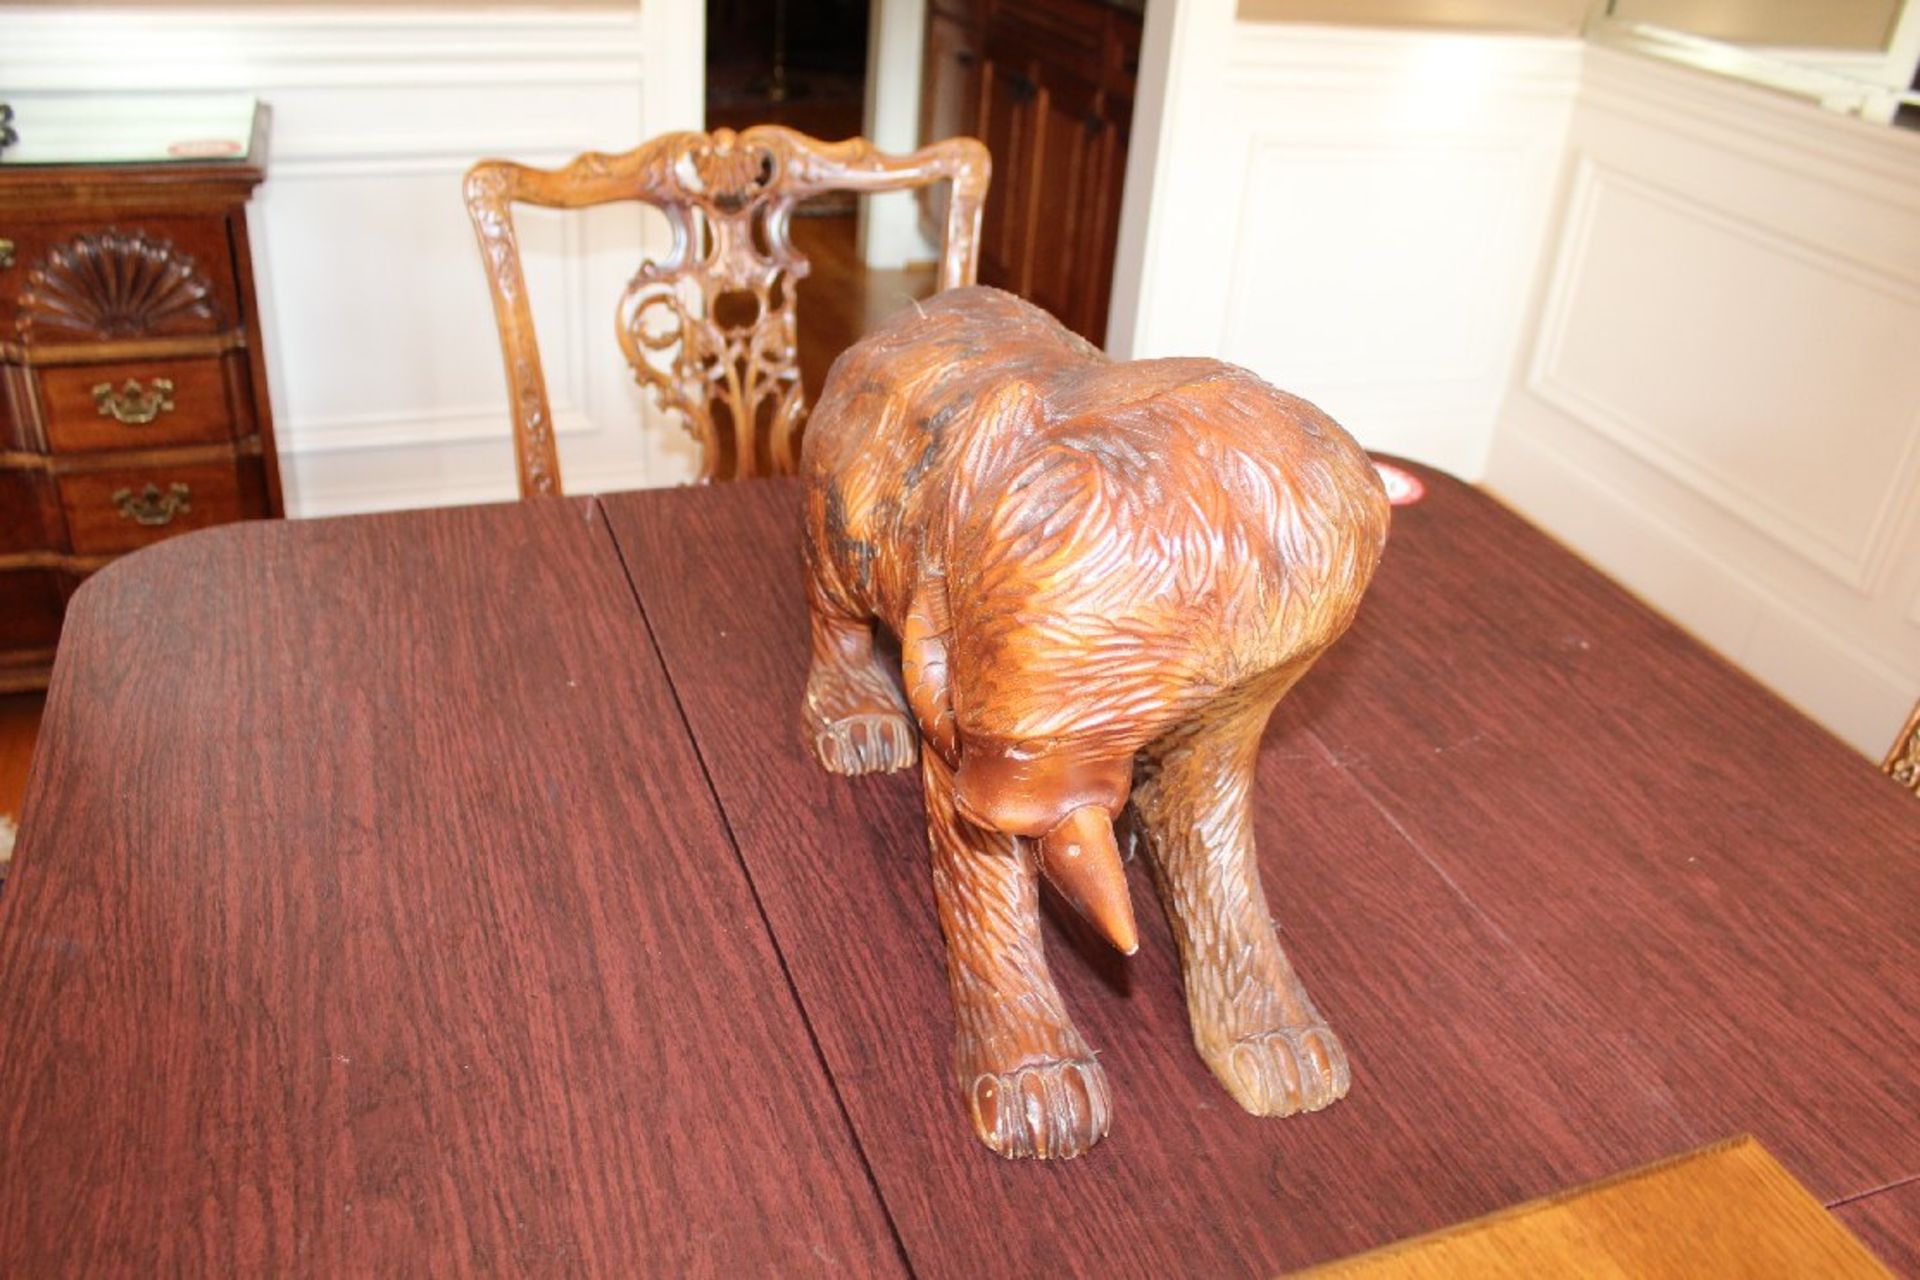 Carved Wooden Bear with Salmon in Mouth, Wooden Flatware Box, Pentax Camera - Image 5 of 5